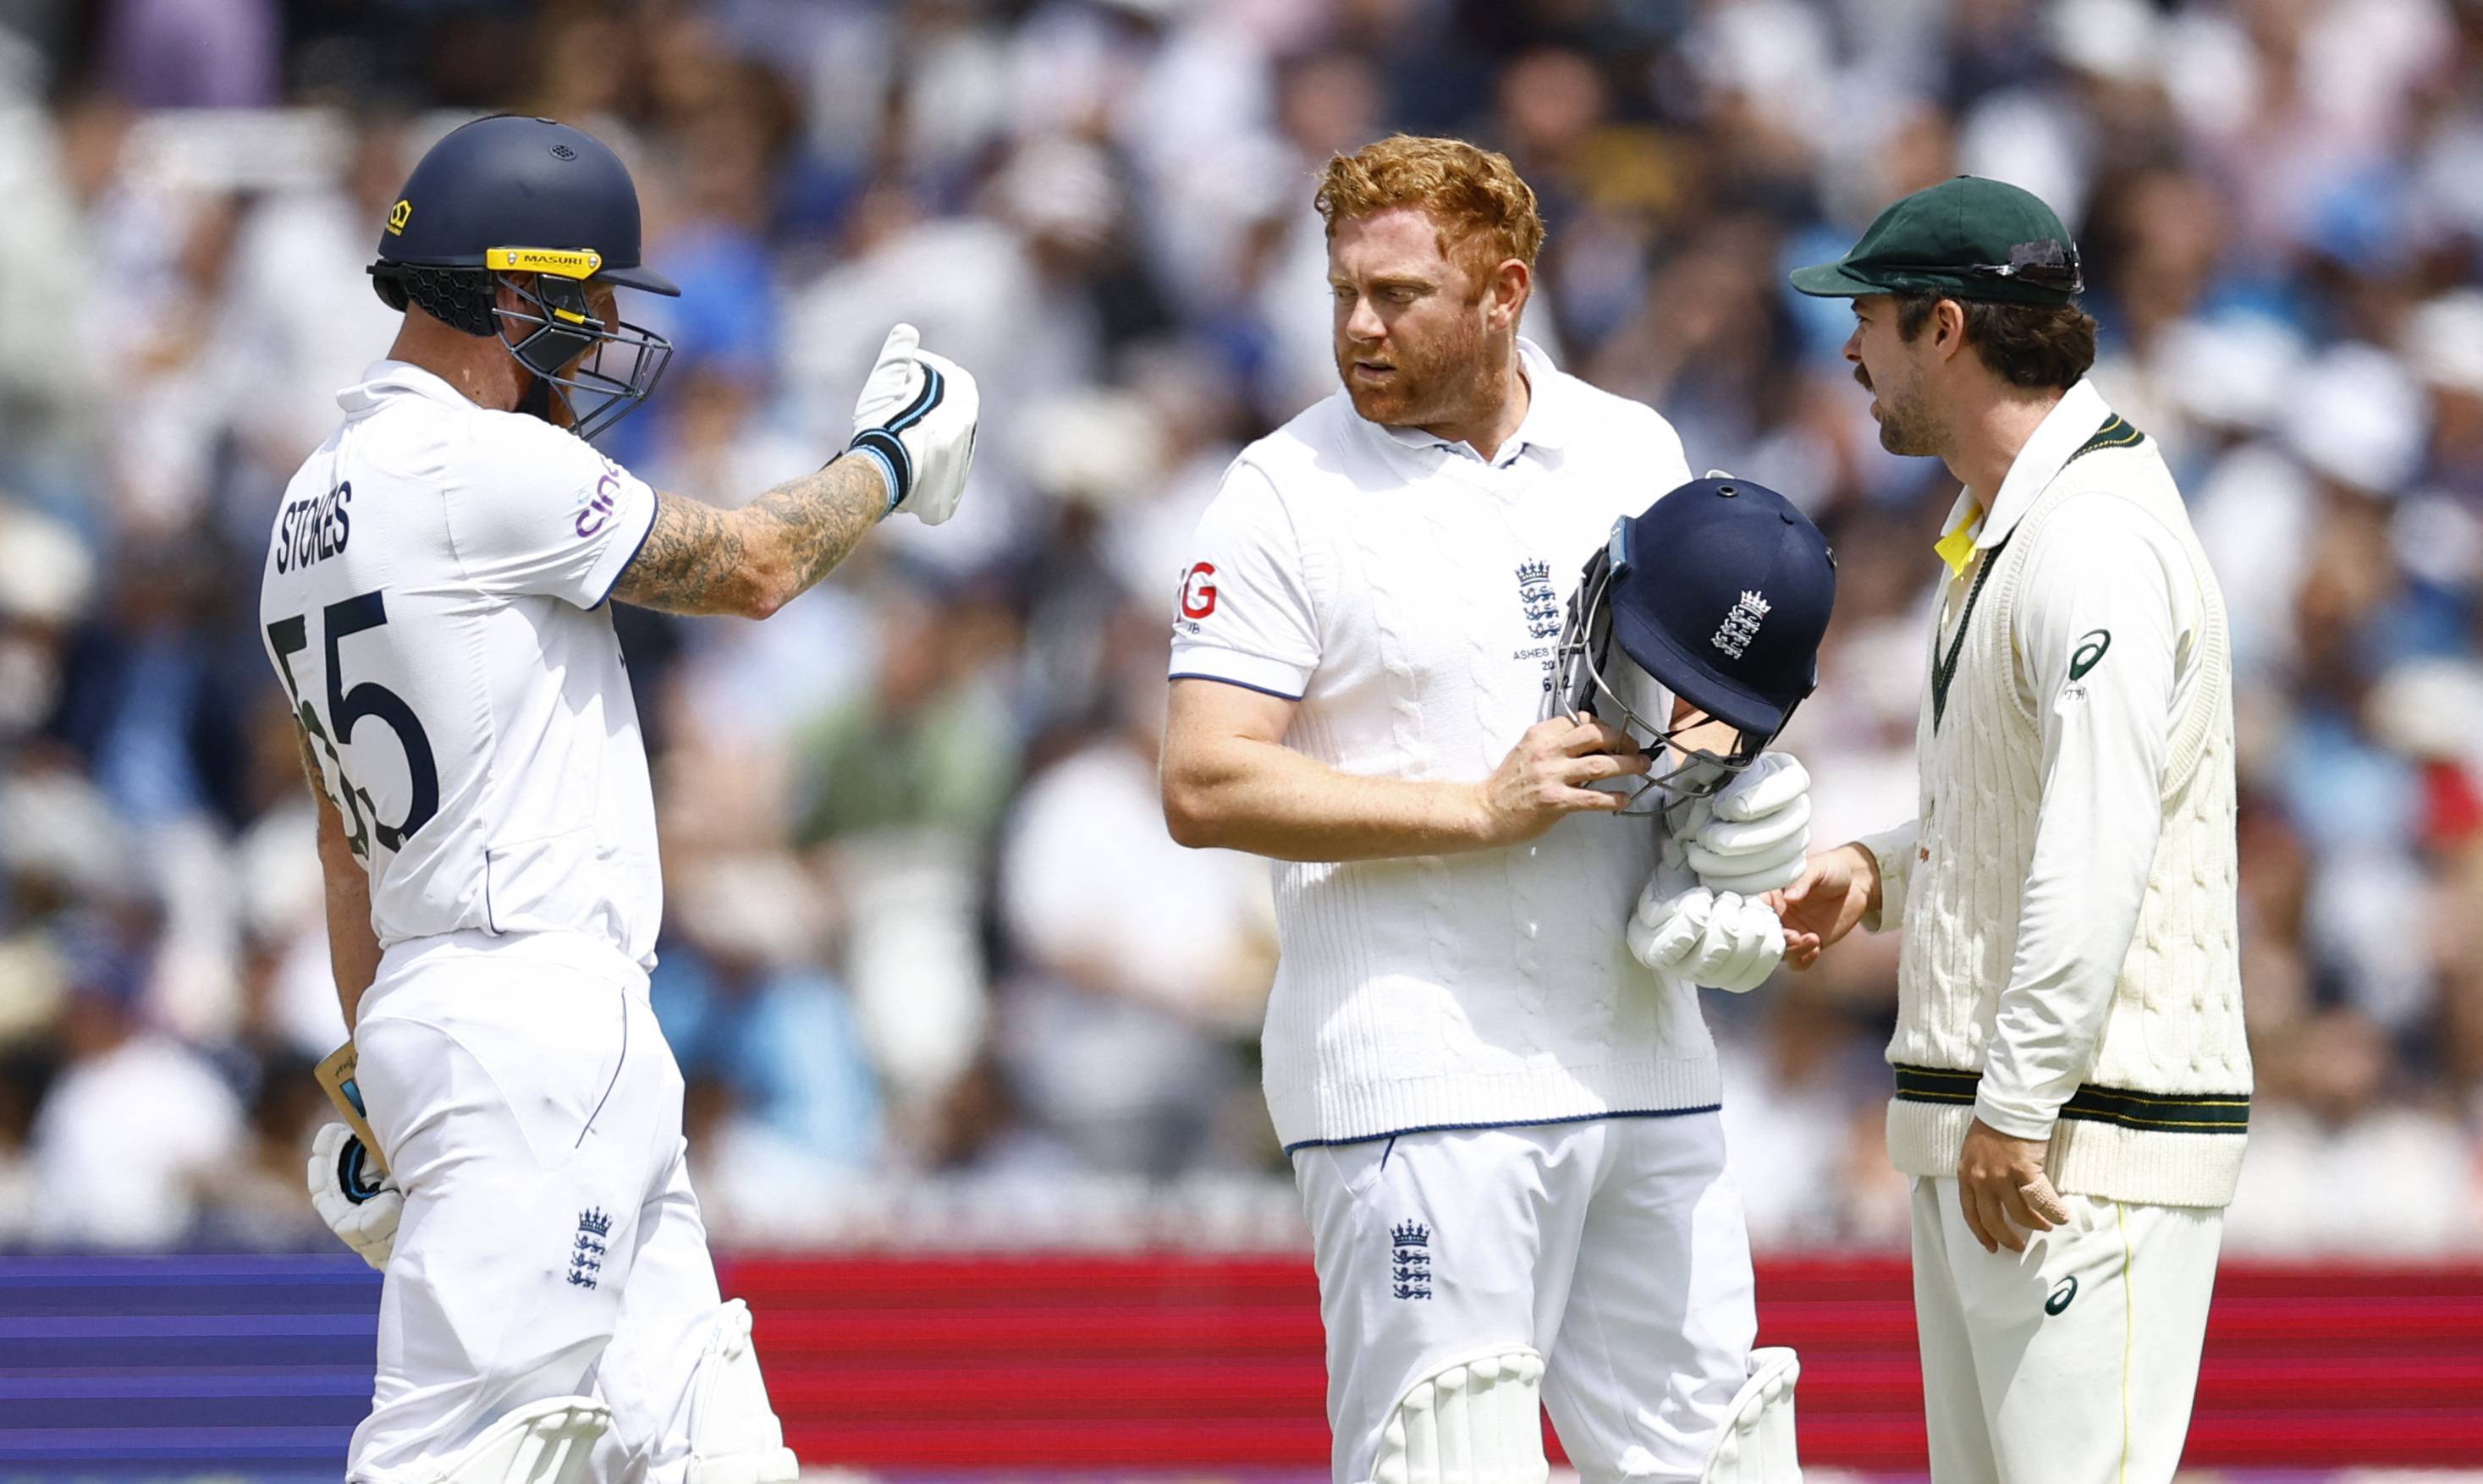 The running out of England's Jonny Bairstow (center) during the second Ashes test in London on Sunday has quickly become one of the rivalry's most controversial moments. | REUTERS